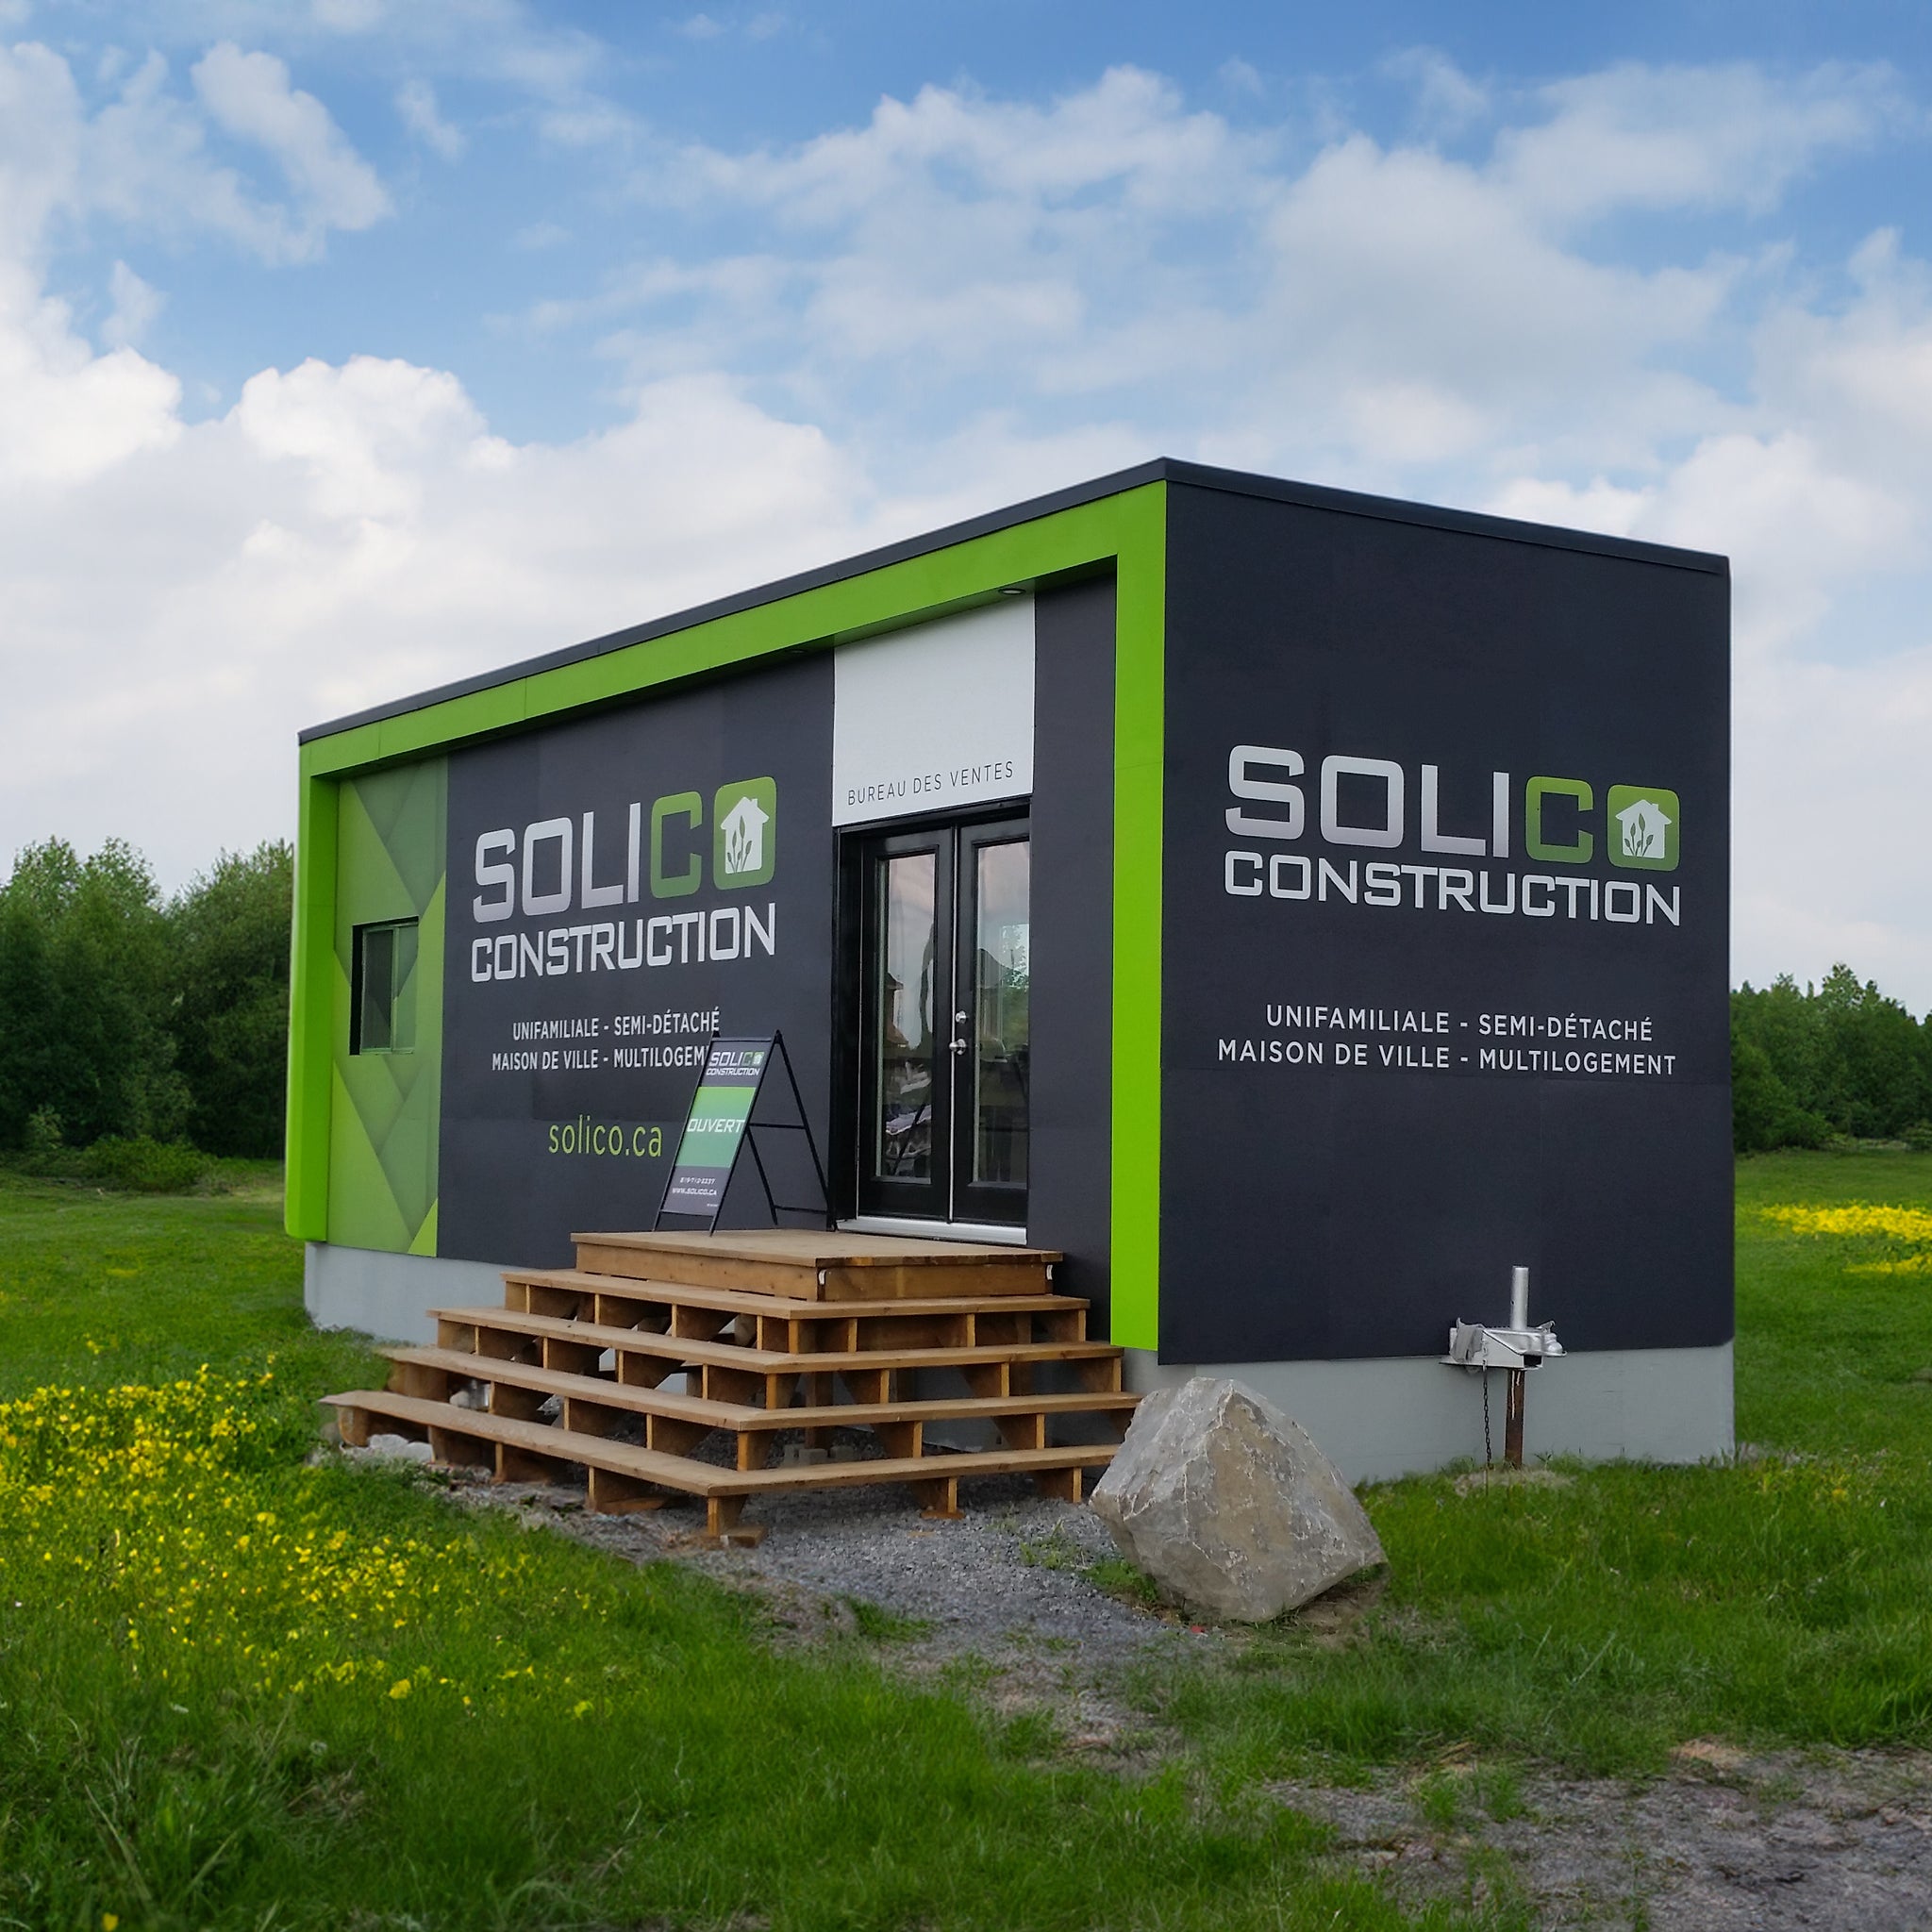 Sales office cladding - Solico